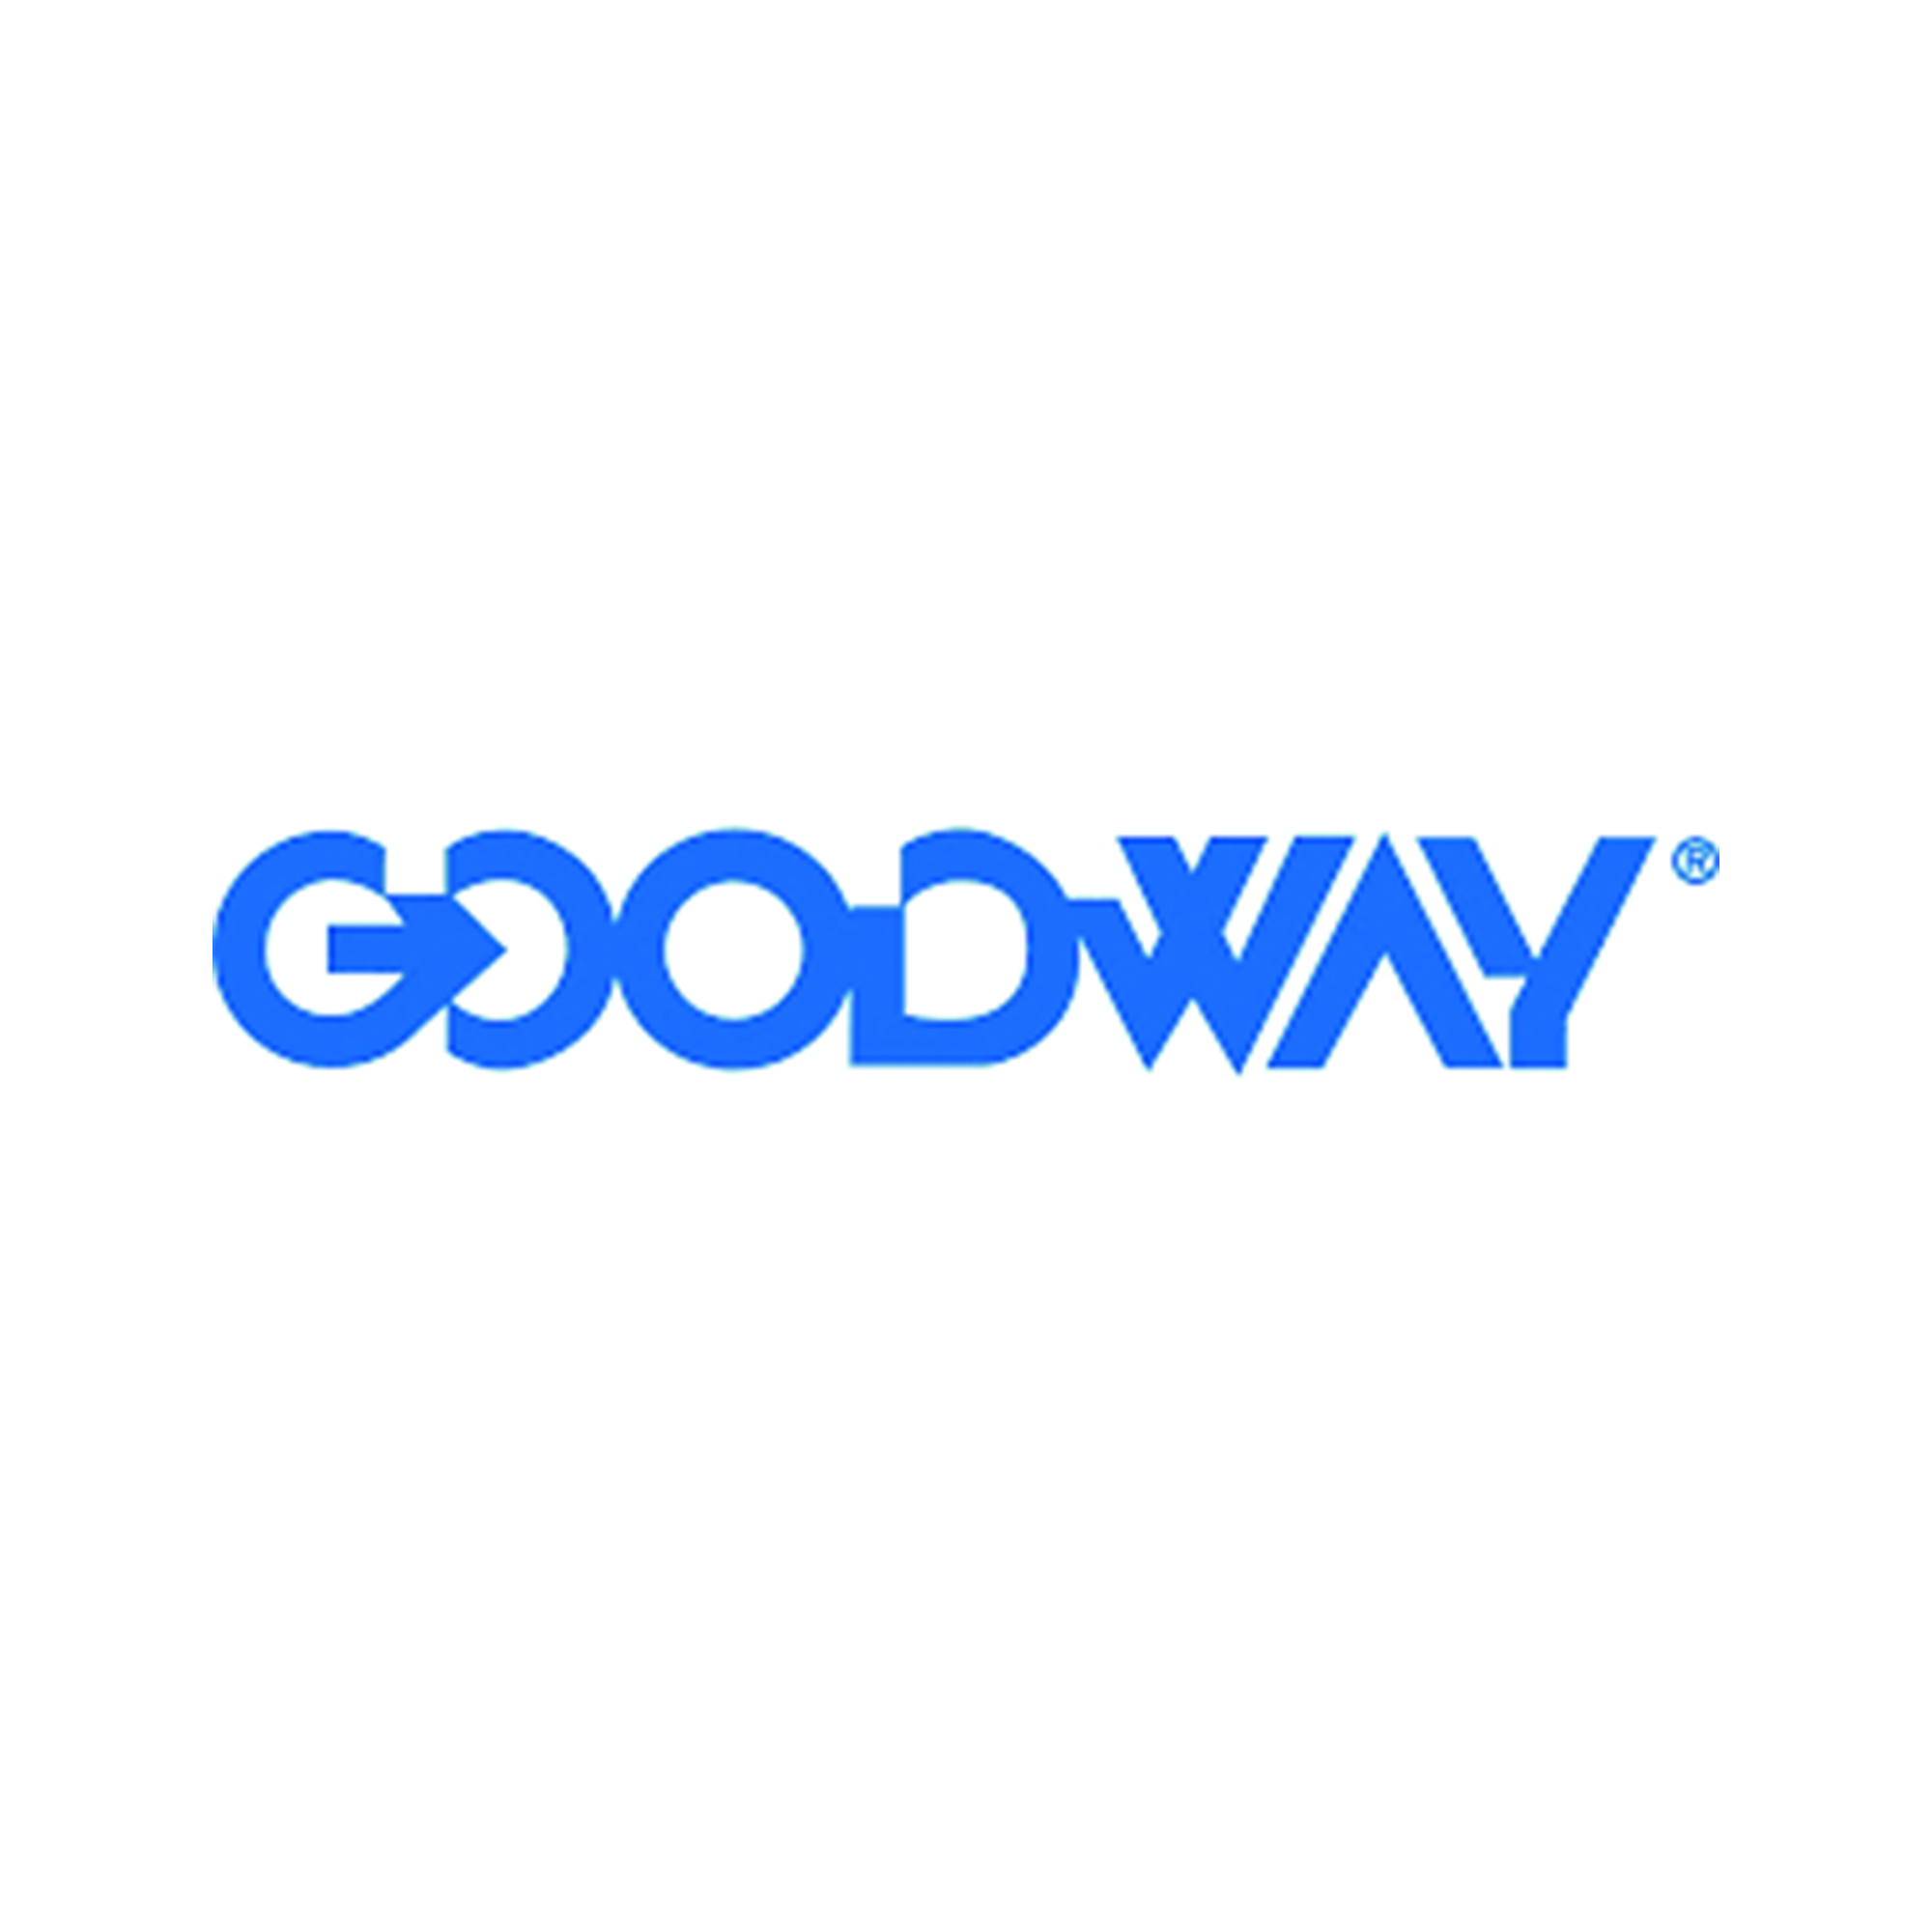 Goodway